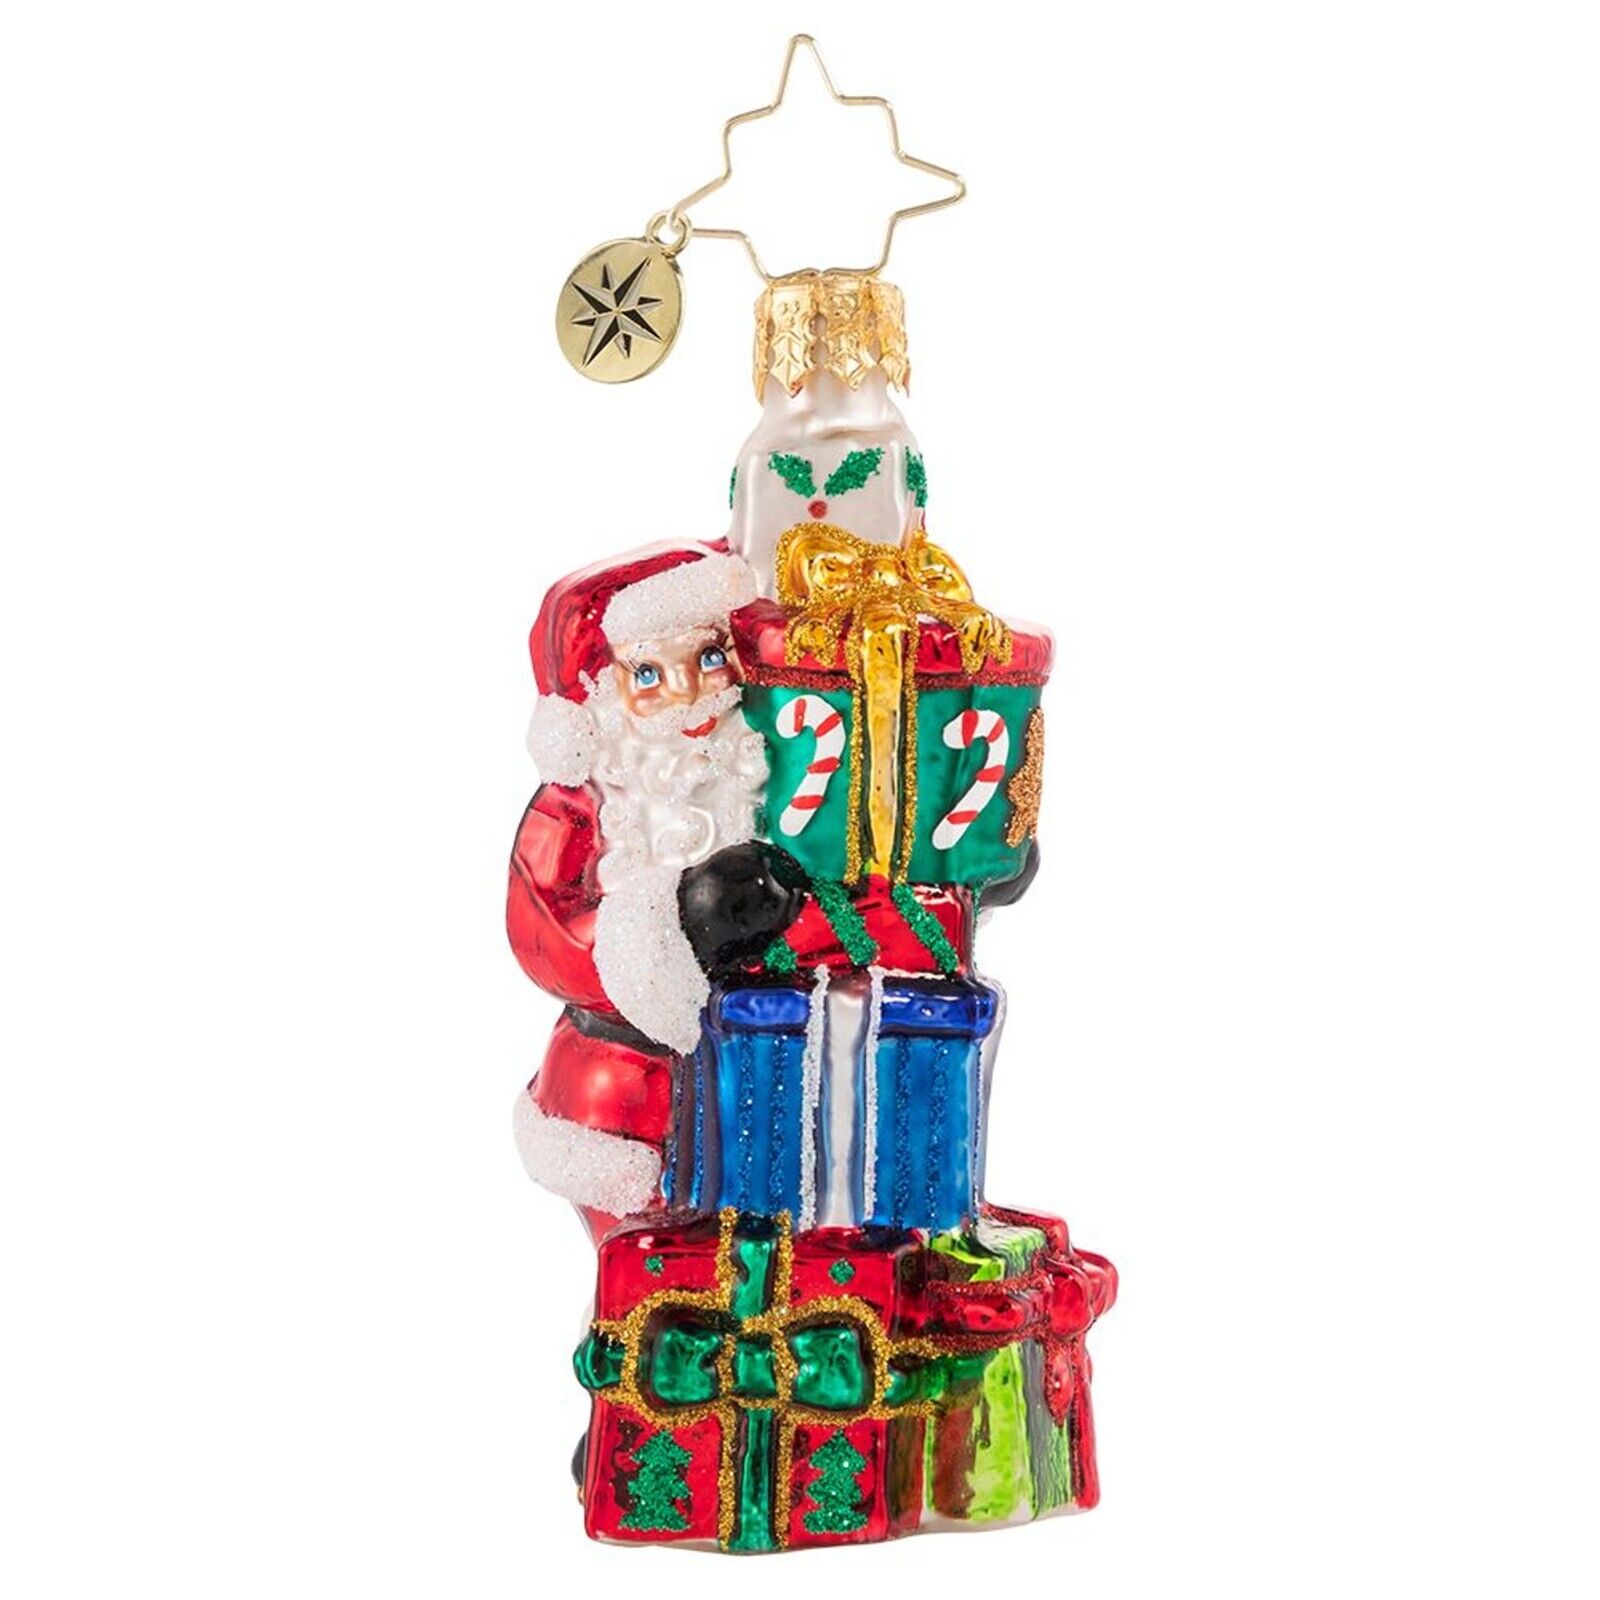 Christopher Radko A Tower Of Tidings Ornament *BRAND NEW* 1020089